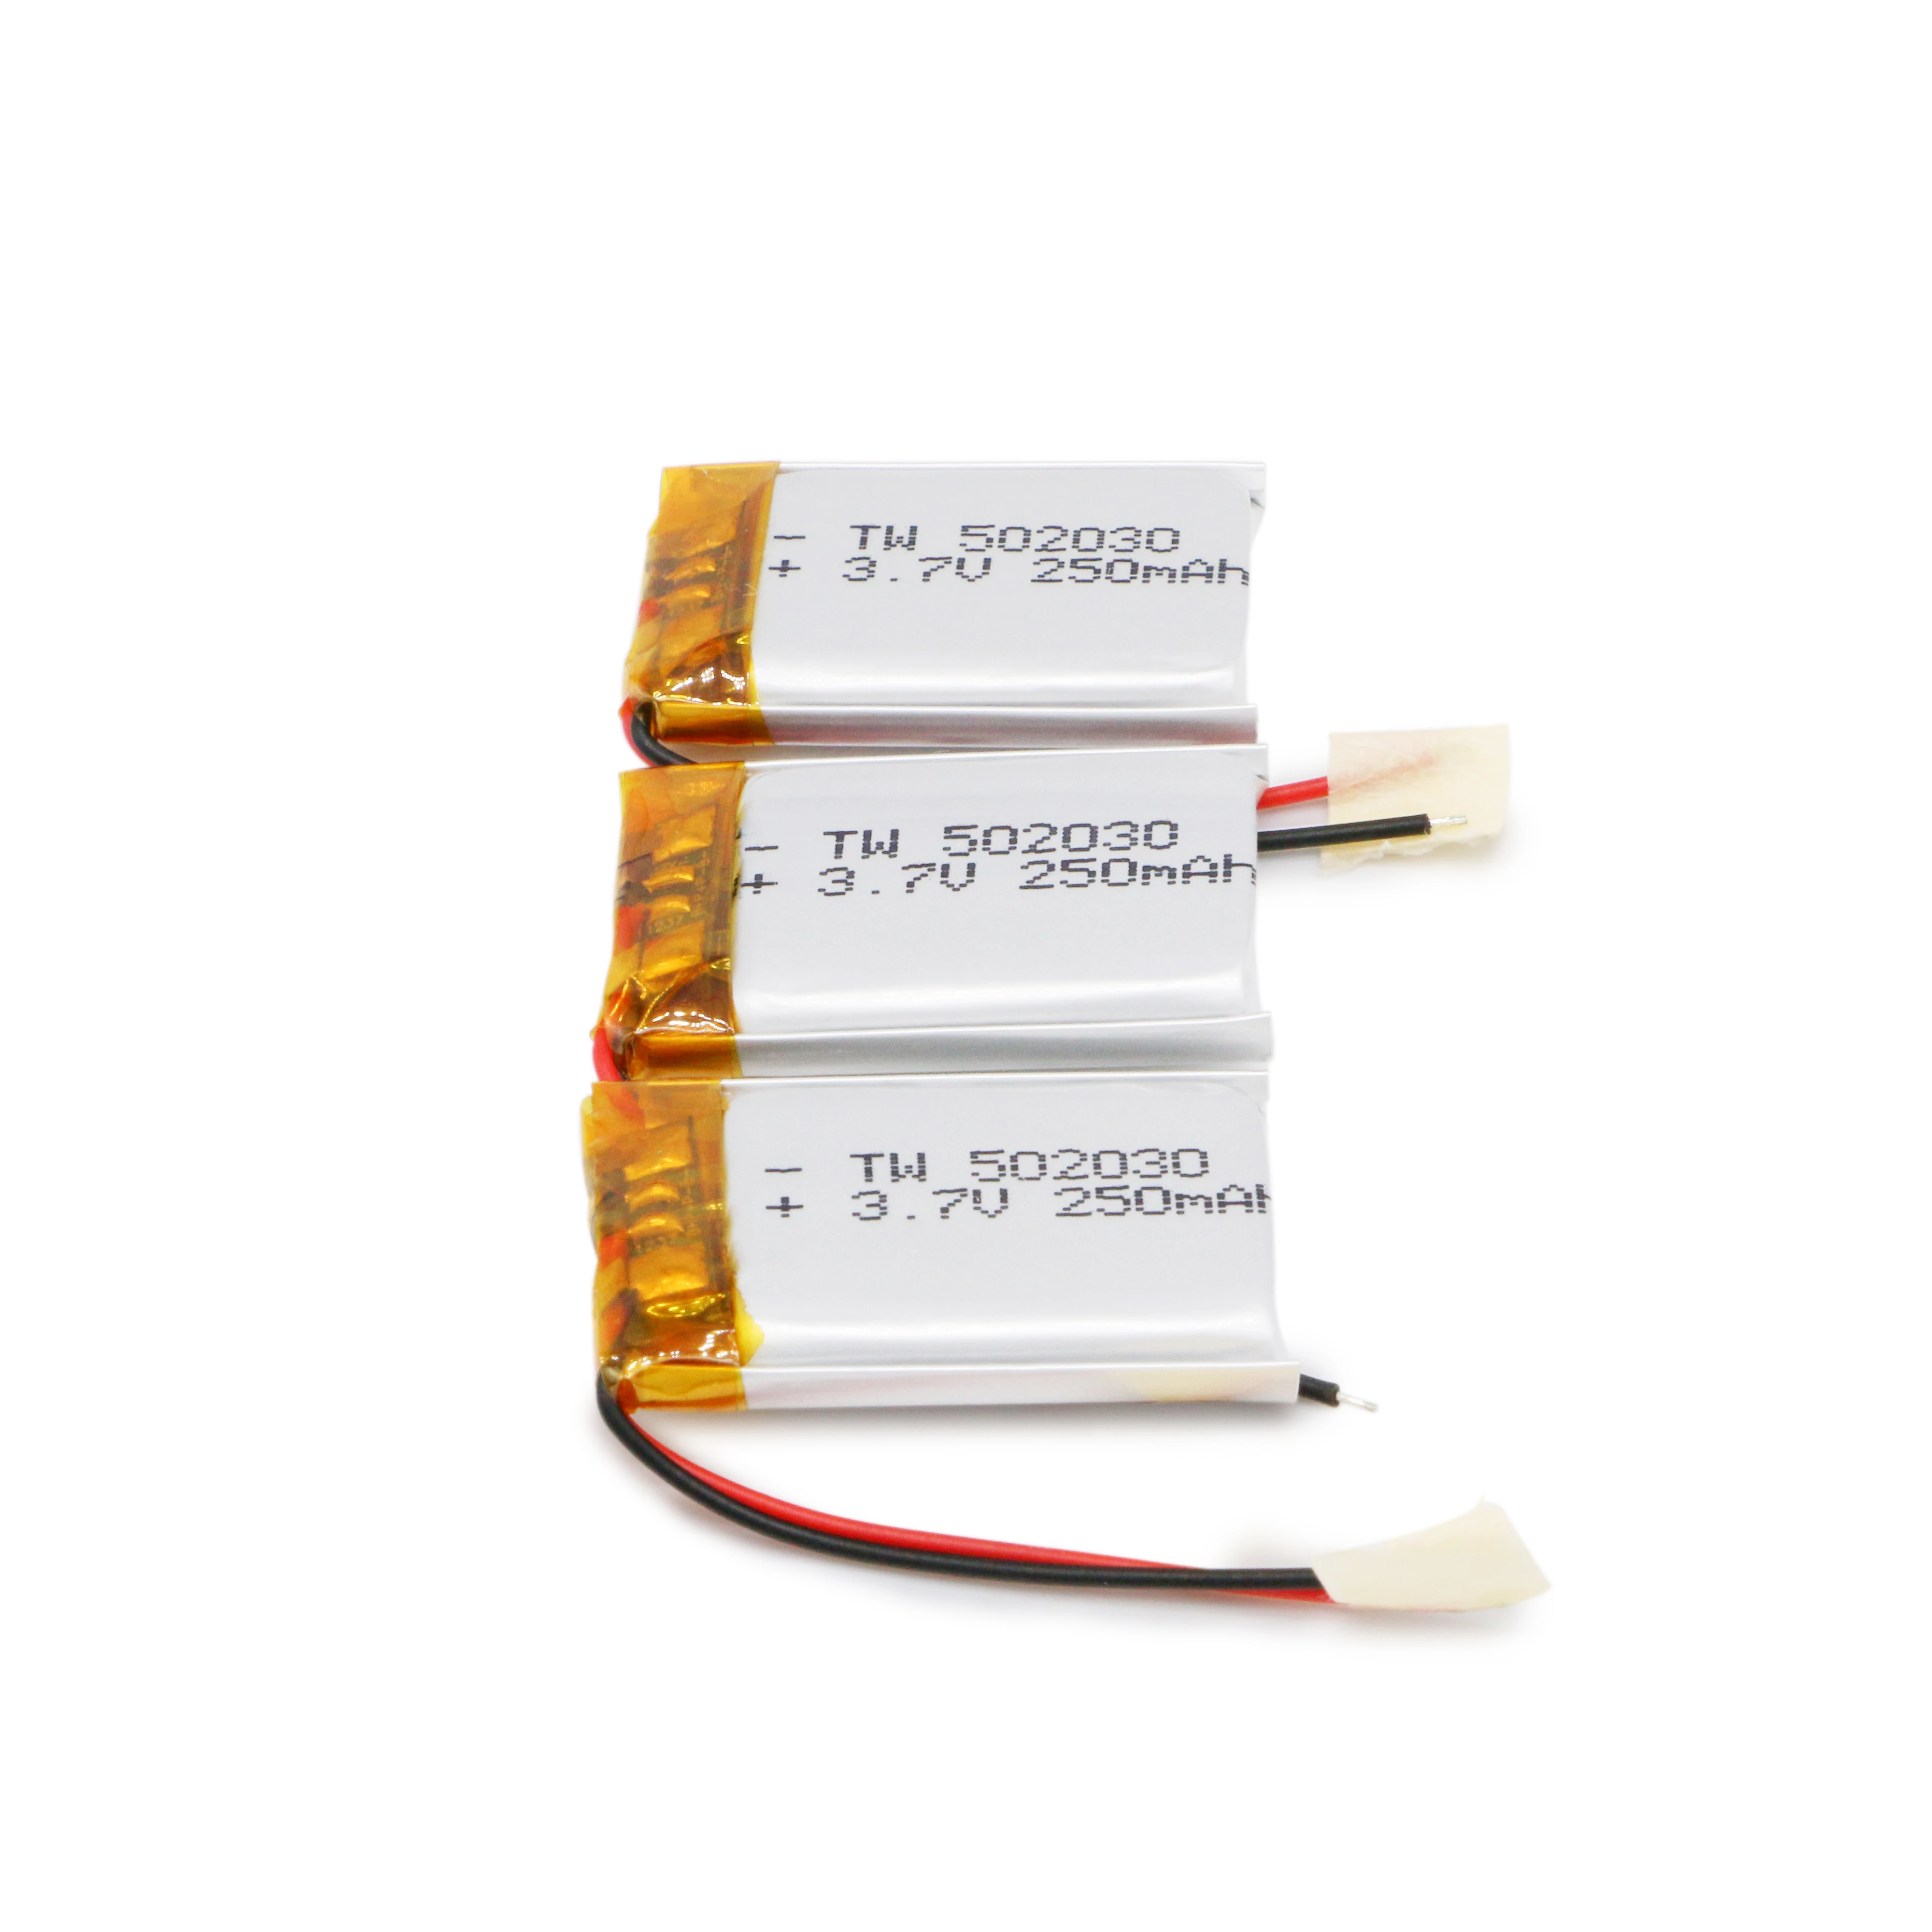 502030 250mAh 3.7v machine rectangular lithium polymer ion battery cells pack  with connector